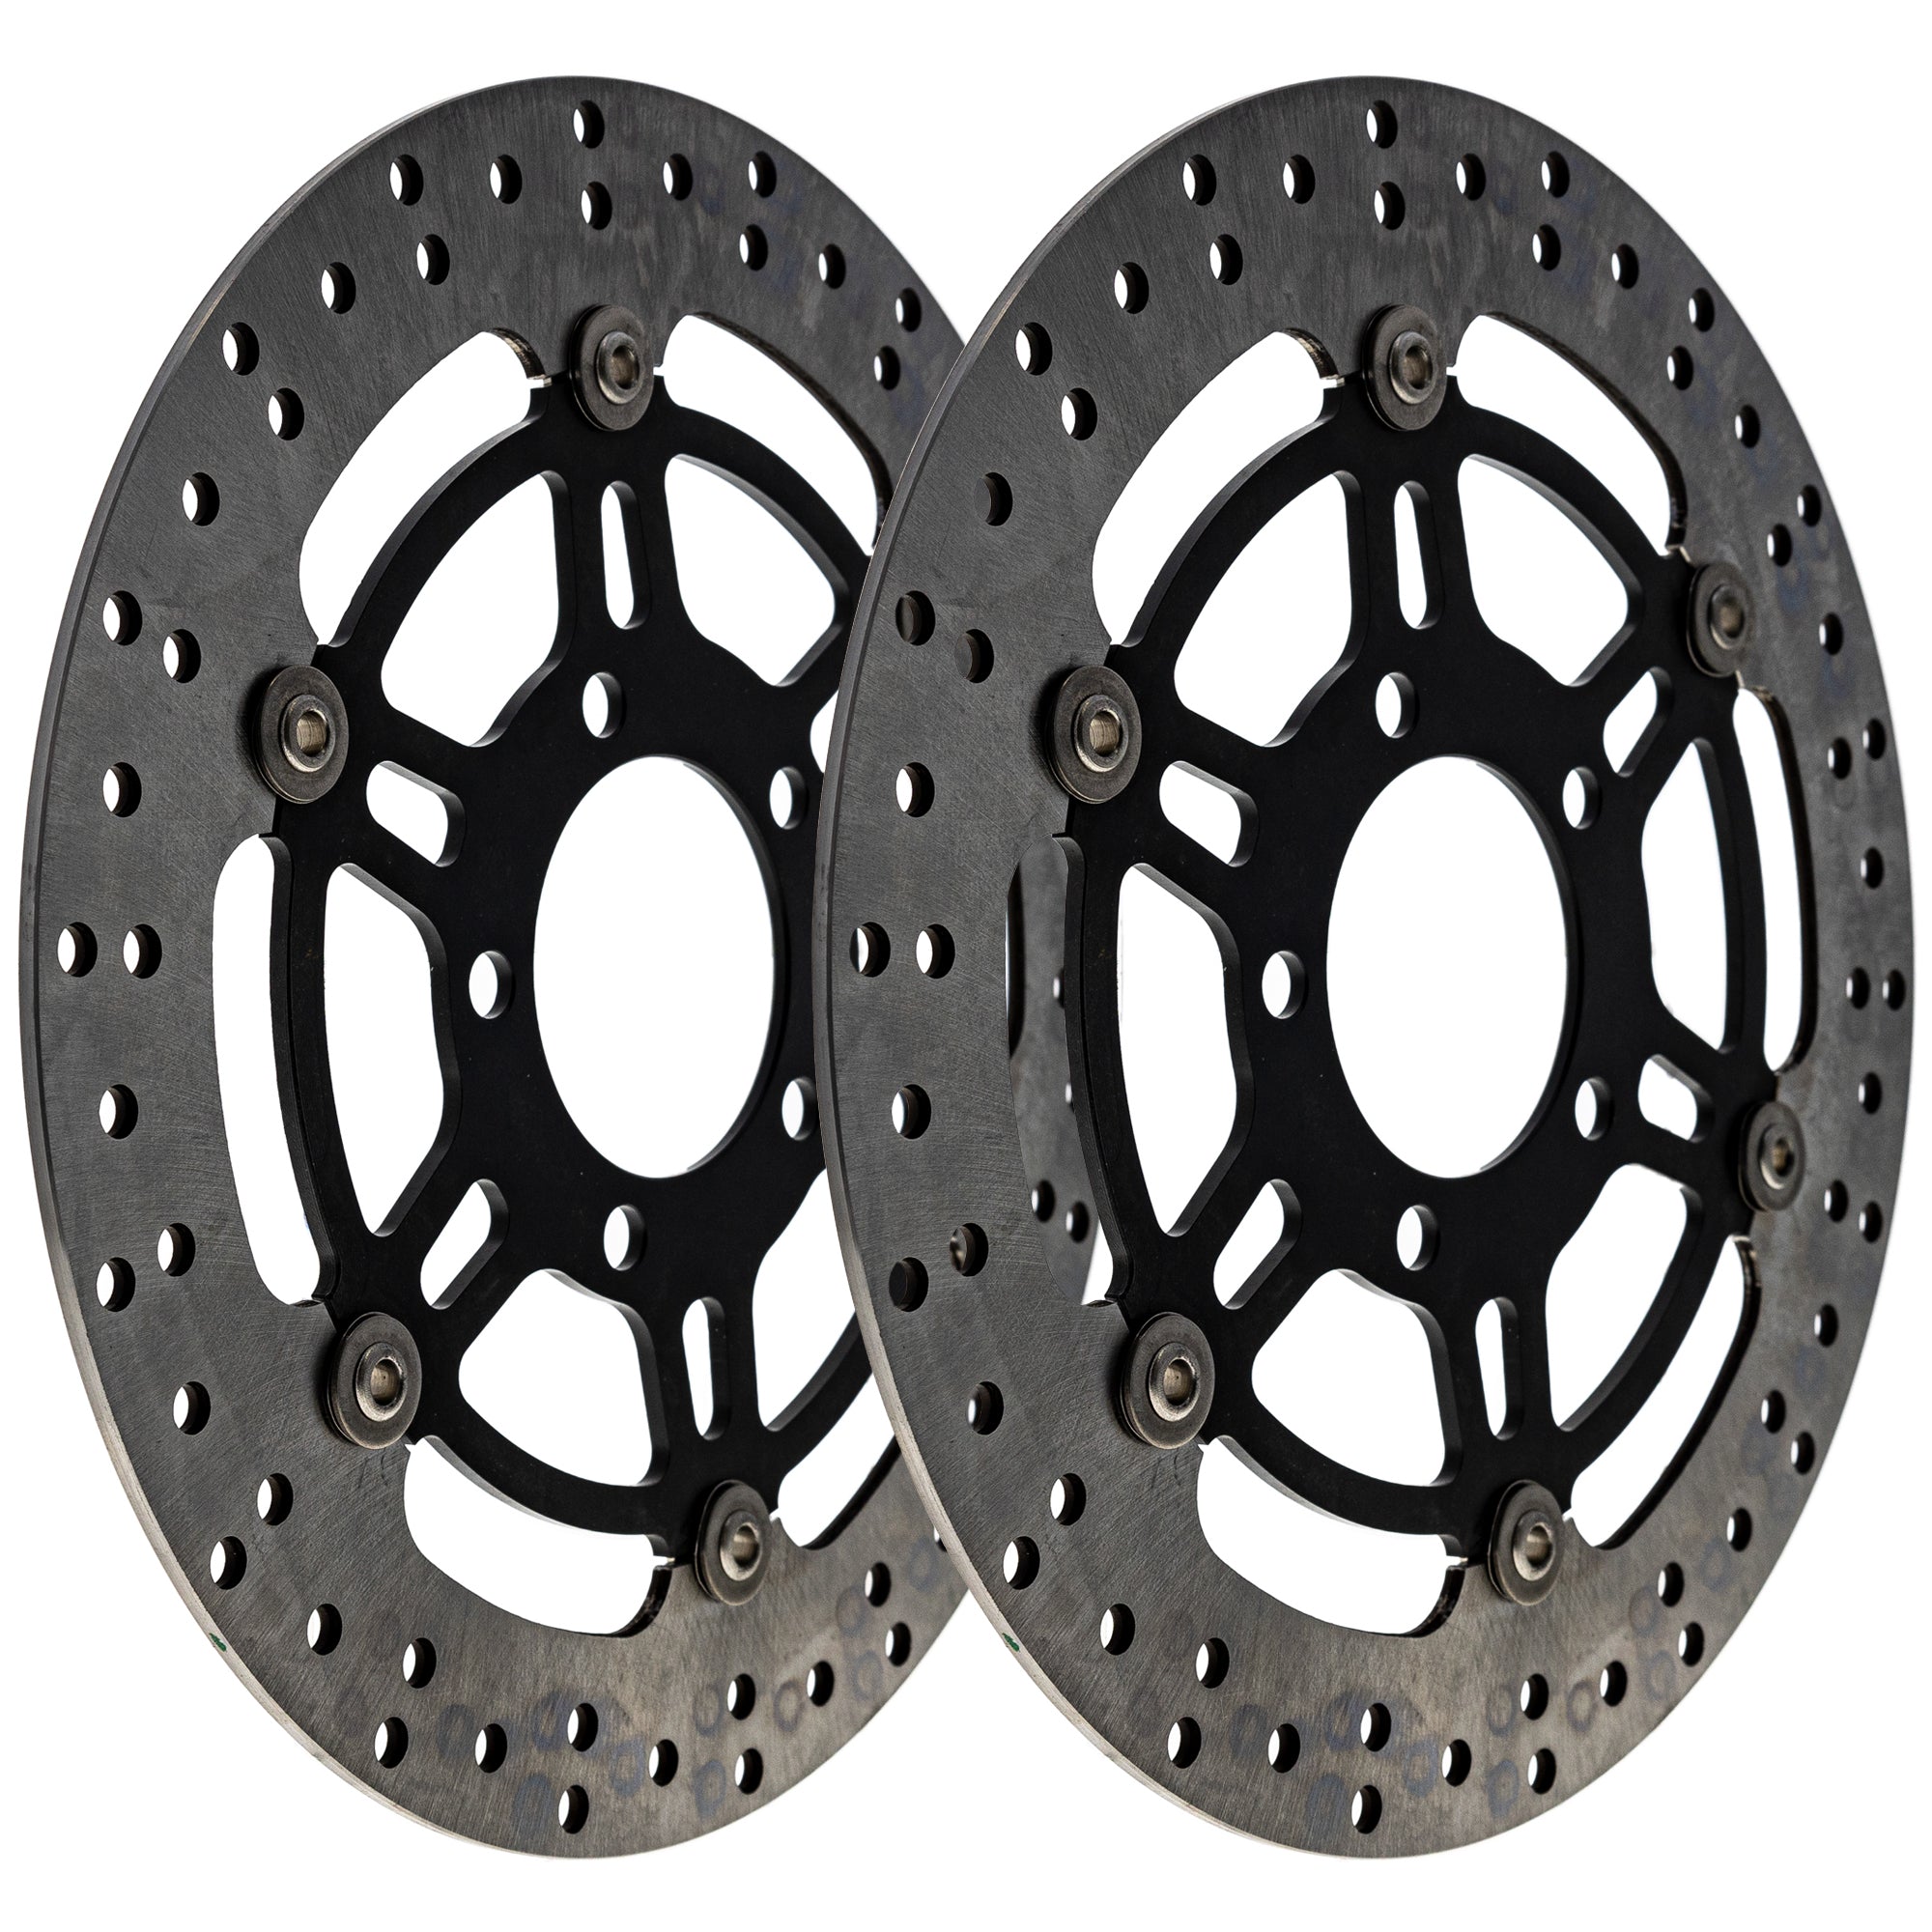 Front Brake Rotor 2-Pack for zOTHER SV650SF SV650S SV650A SV650 NICHE 519-CRT2367R